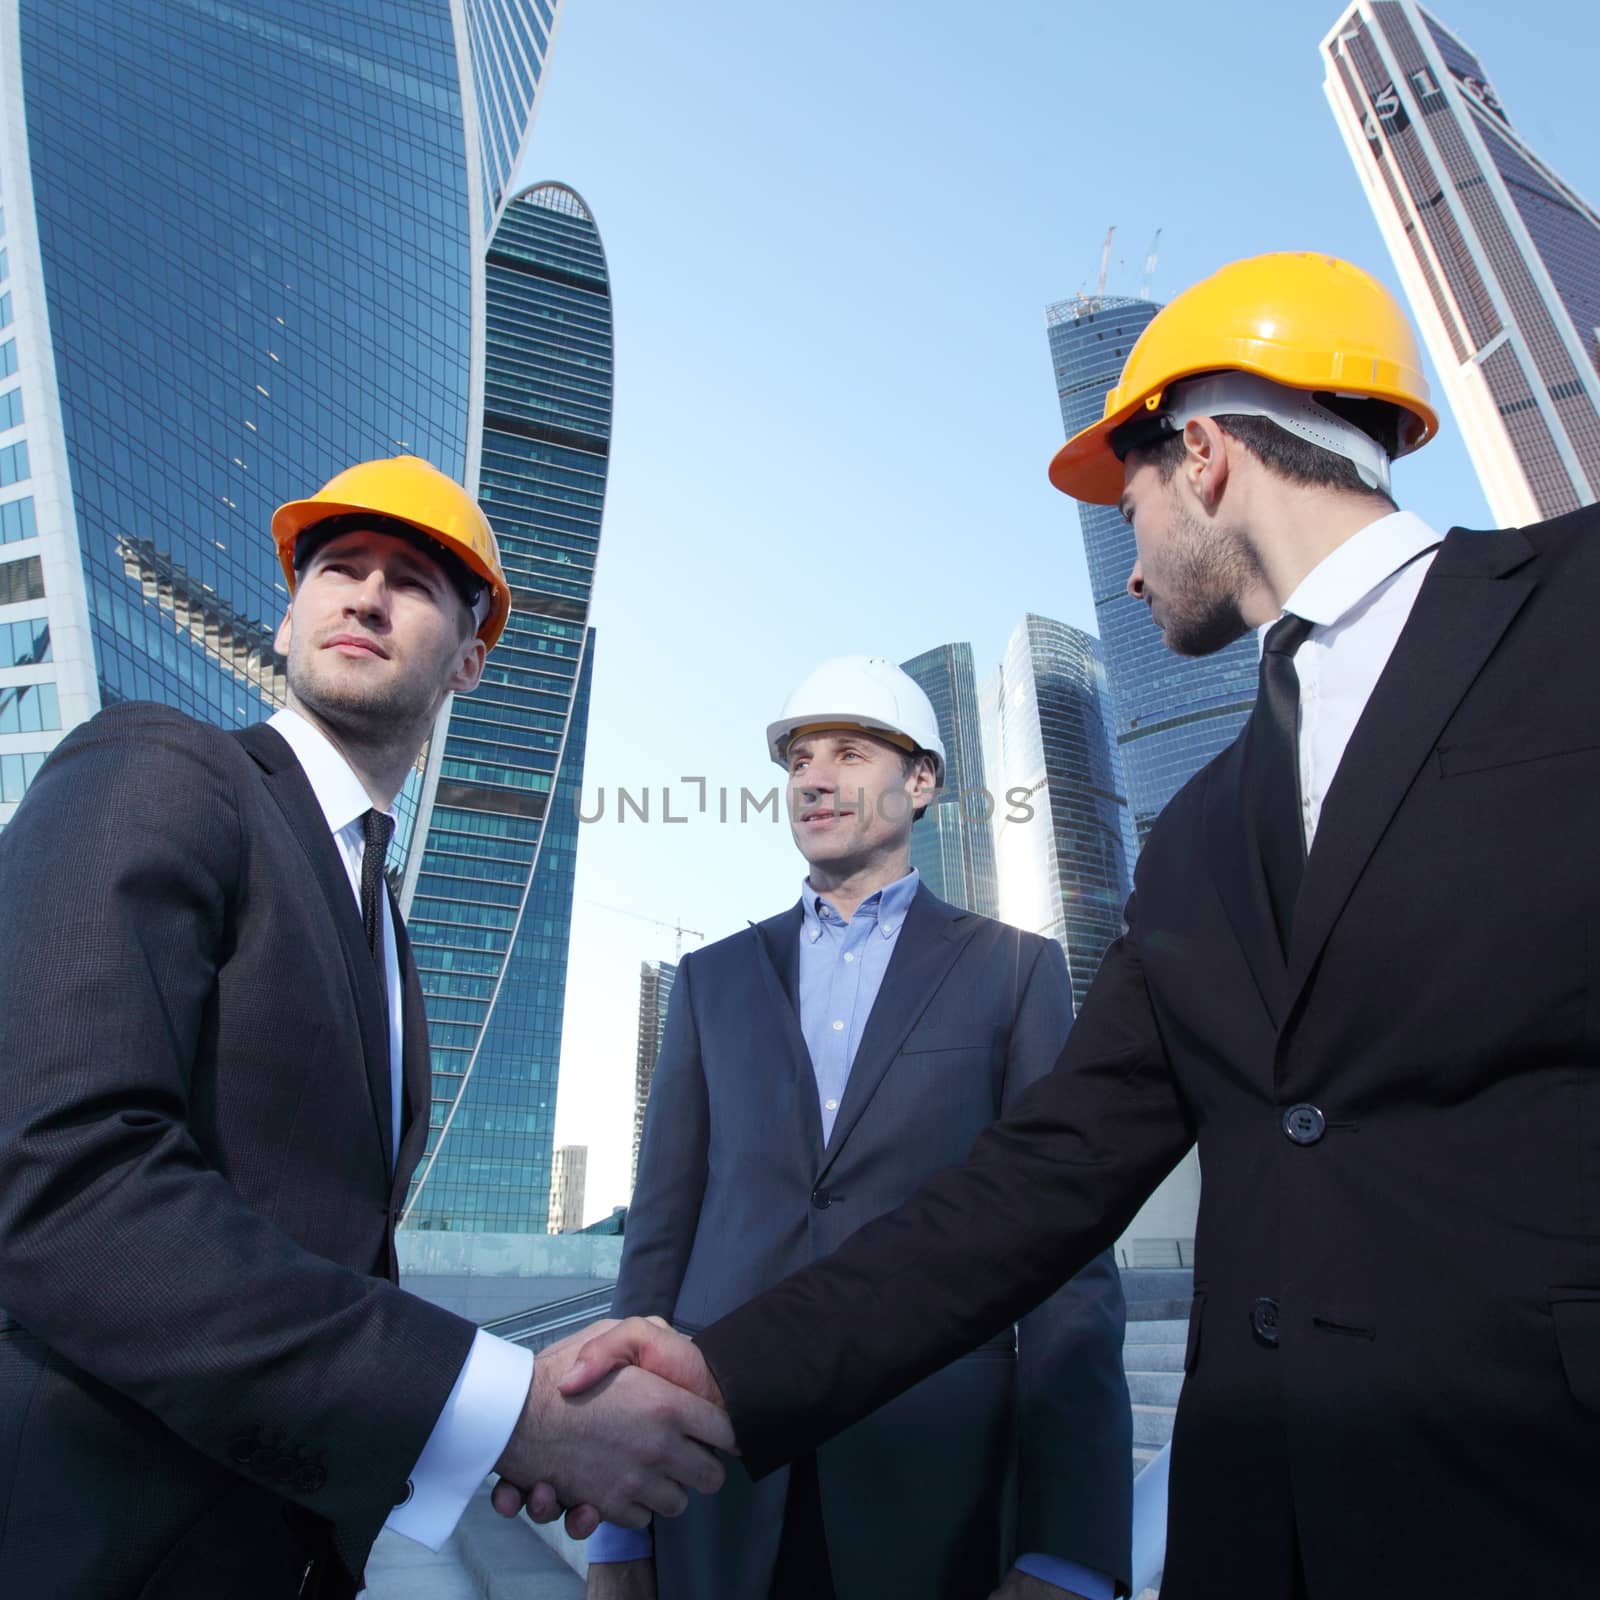 Investor and contractor shaking hands by ALotOfPeople